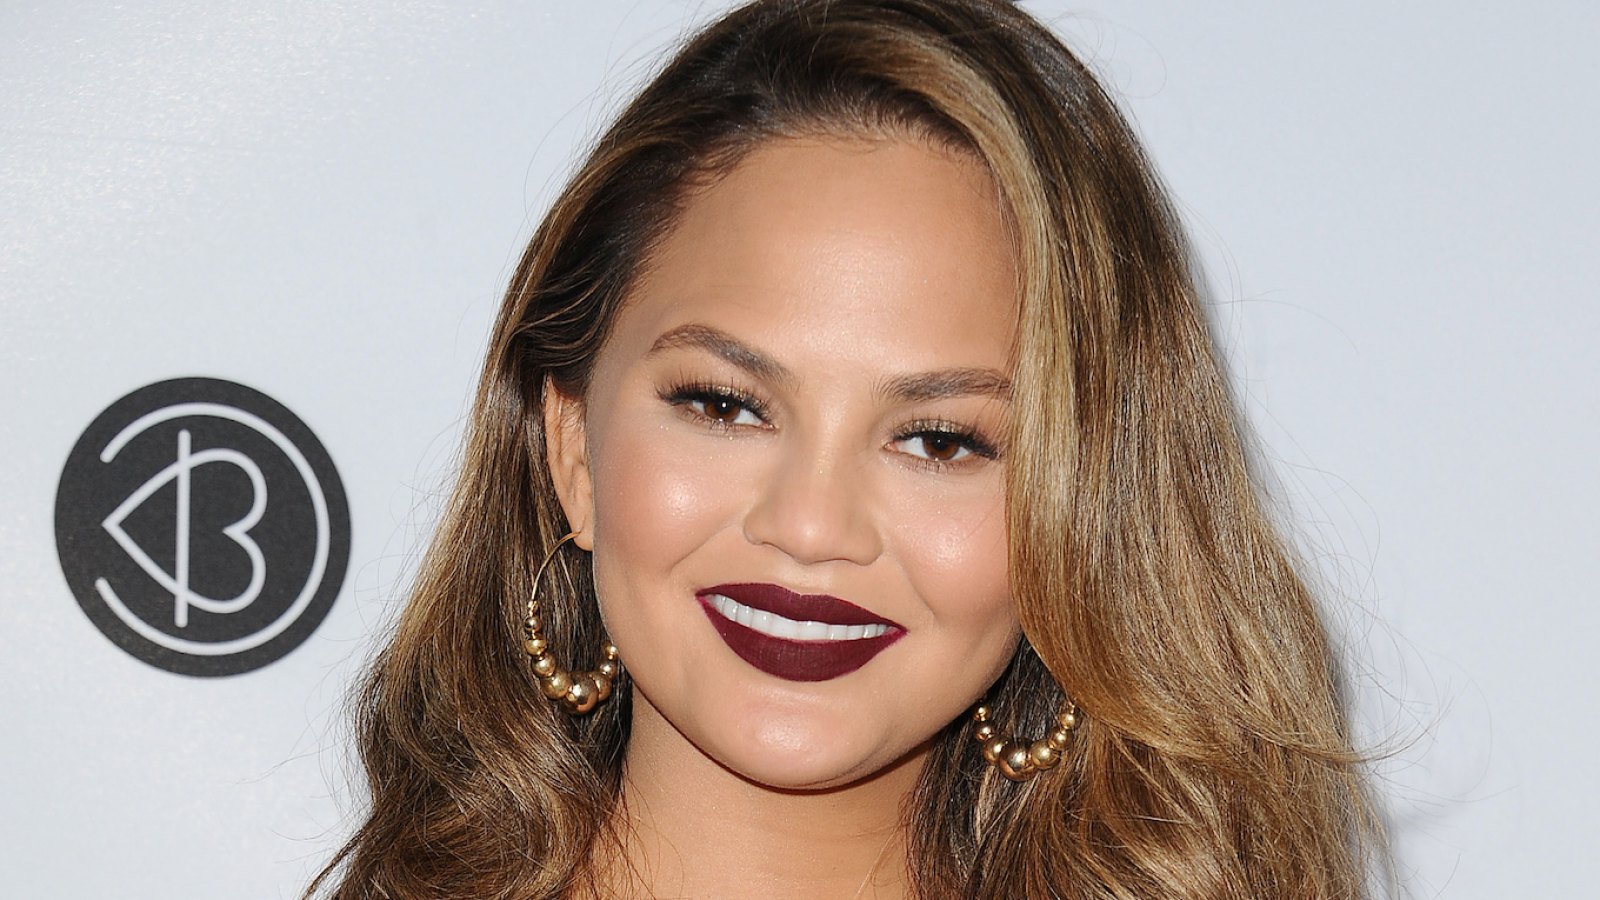 Chrissy Teigen Hits Back After Being Criticized for Ballerina Pose